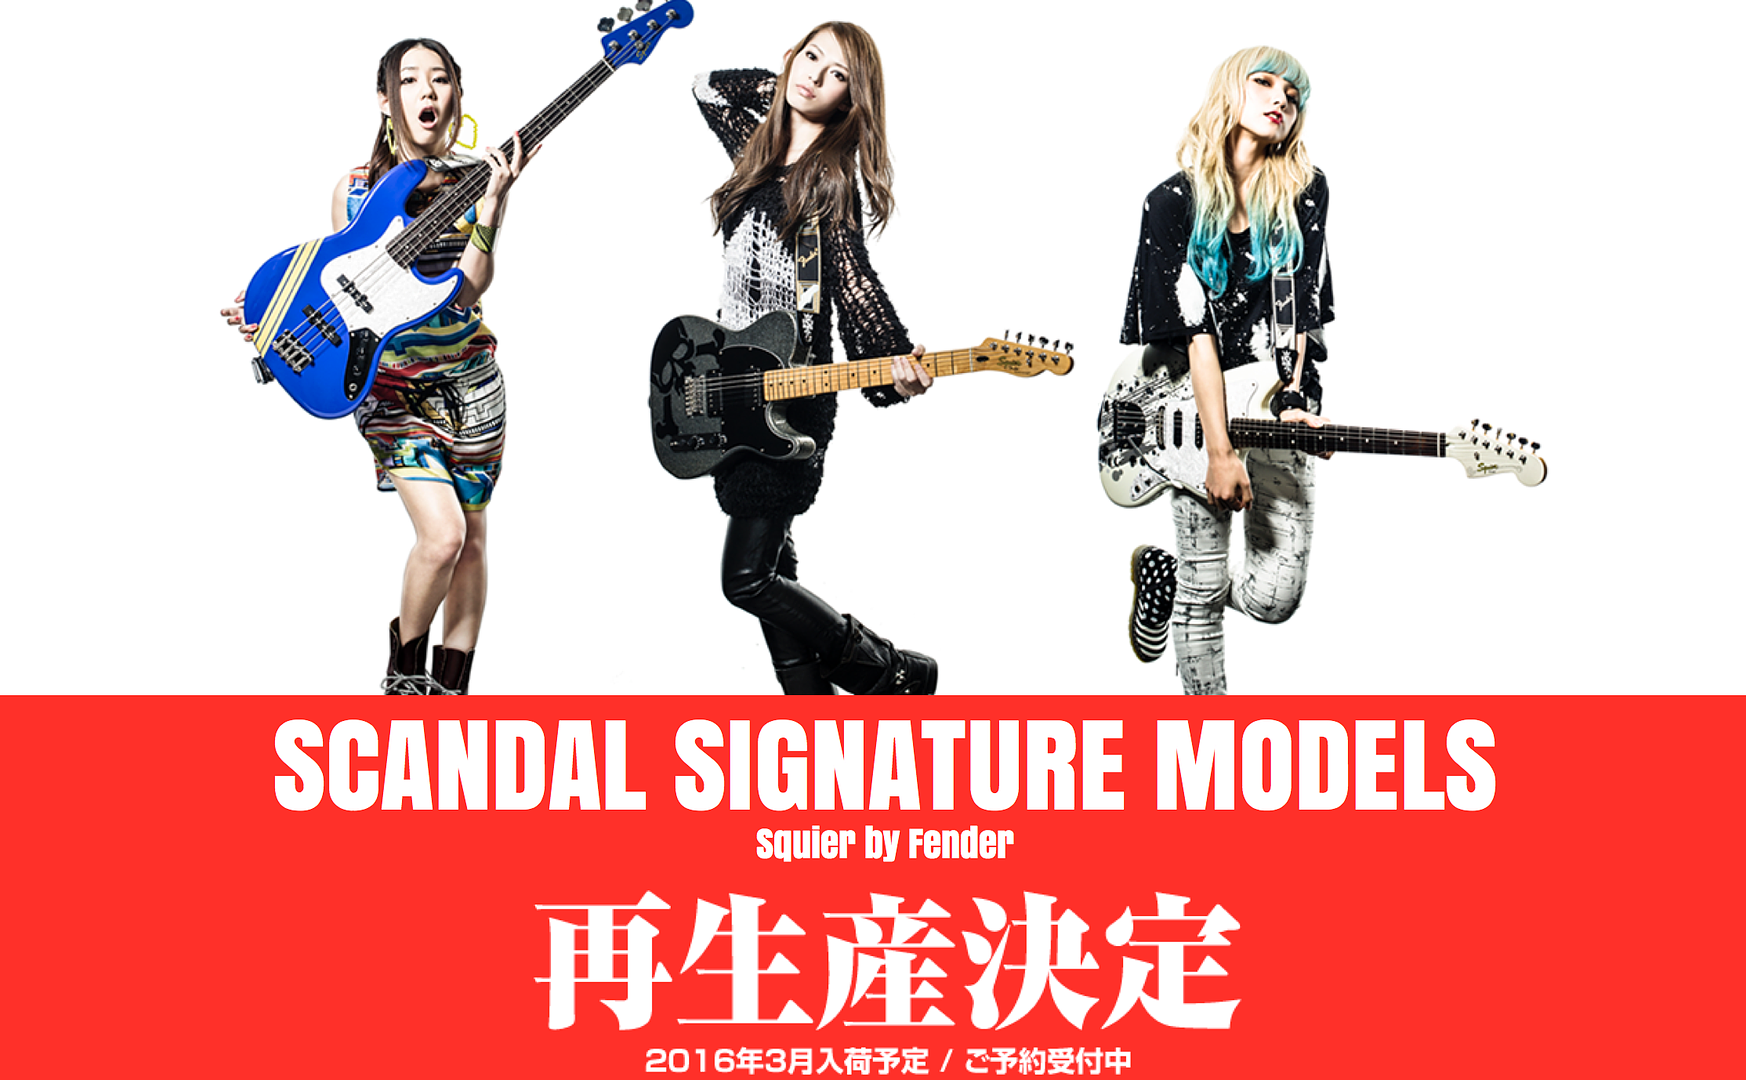 SCANDAL's Signature Squier instruments - Page 15 Screen%20Shot%202016-03-03%20at%2007.01.11_zpsc7m8sujg